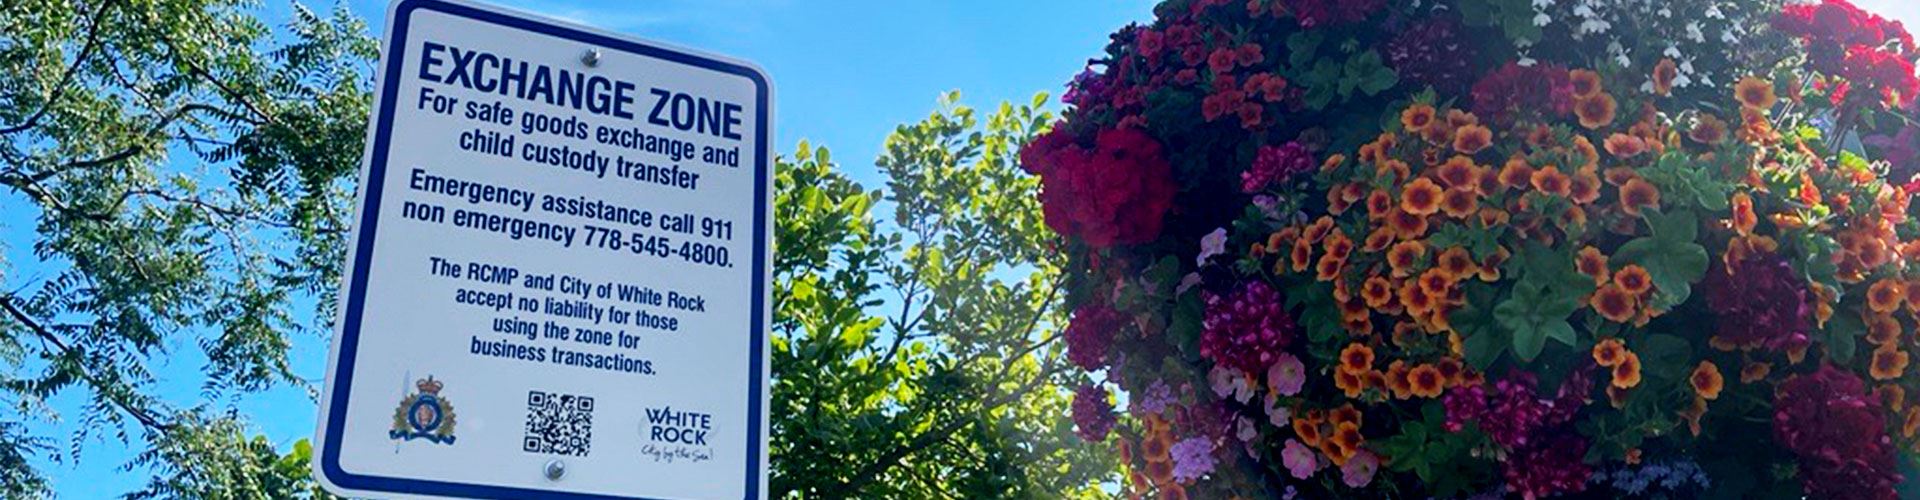 White Rock RCMP Exchange Zone sign with flower basket